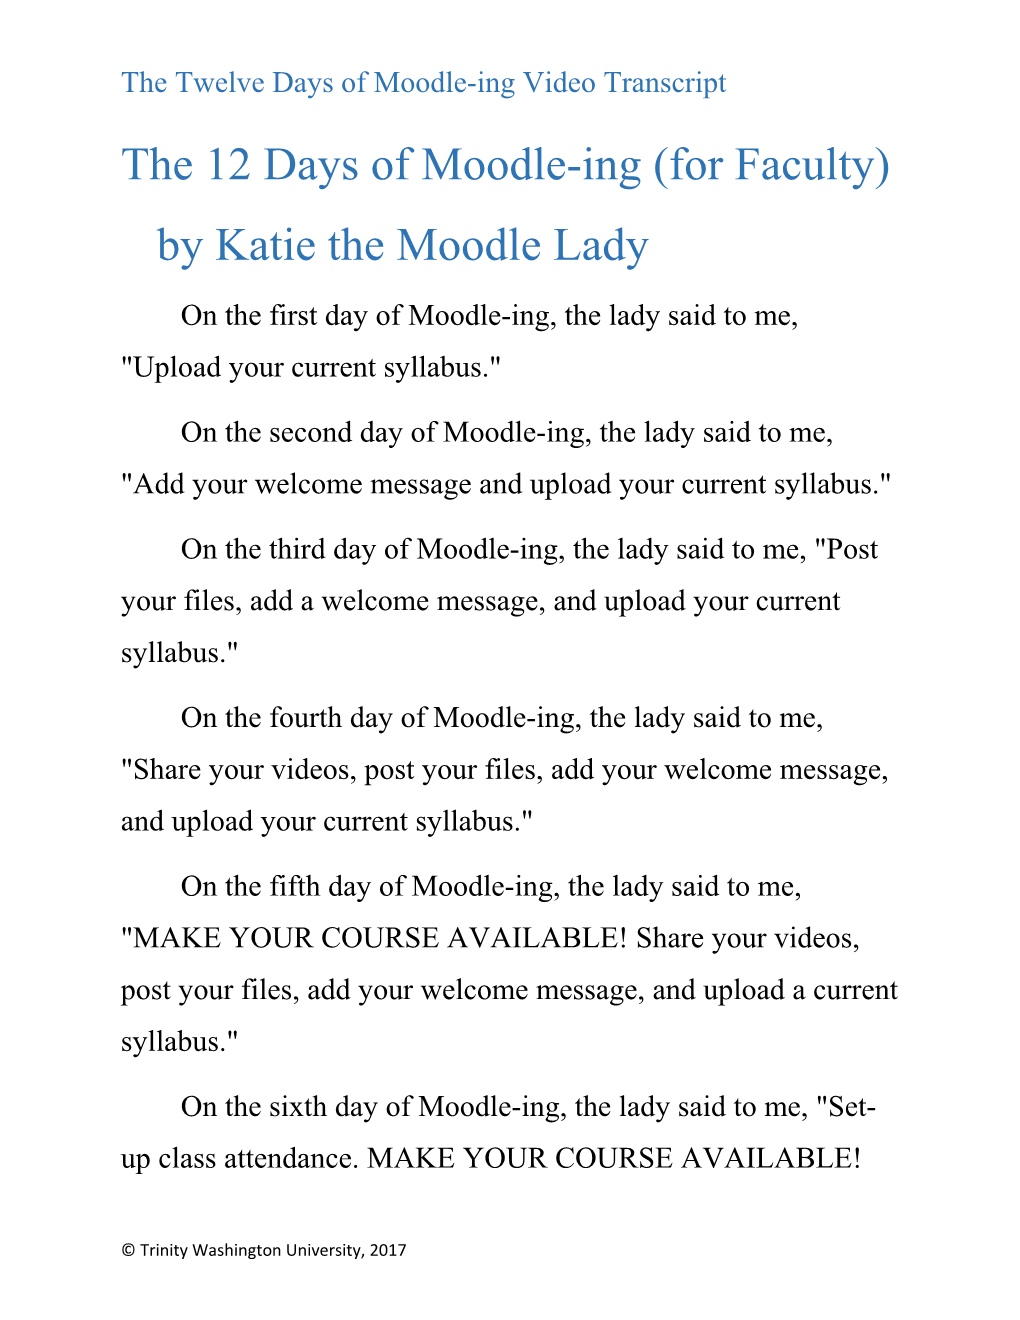 The Twelve Days of Moodle-Ing Video Transcript